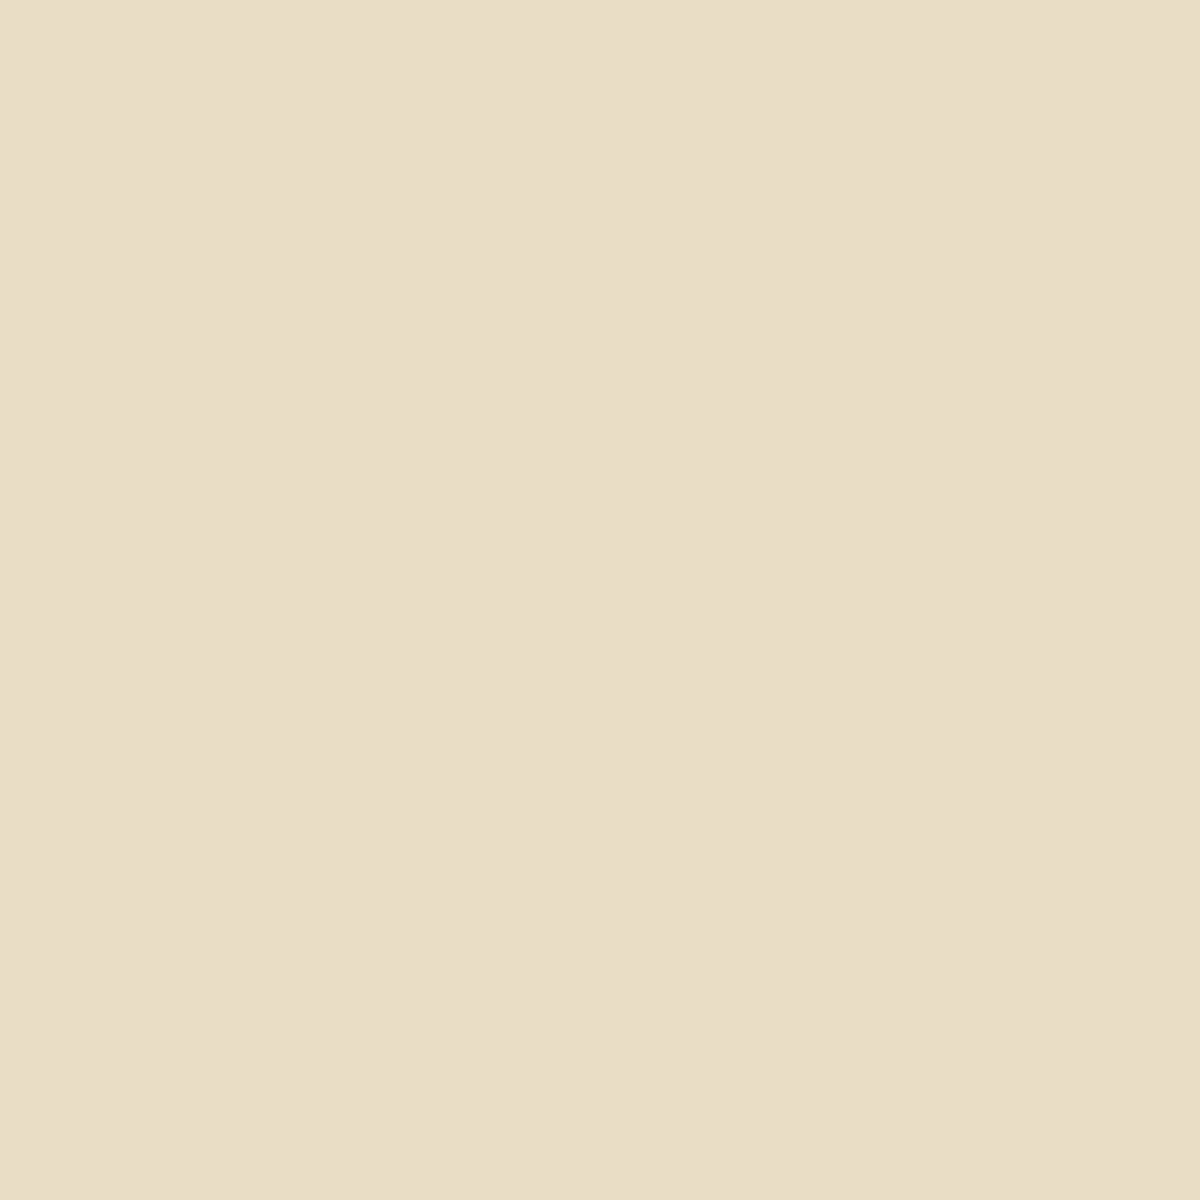 Benjamin Moore Barely Beige (1066) Paint color codes, similar